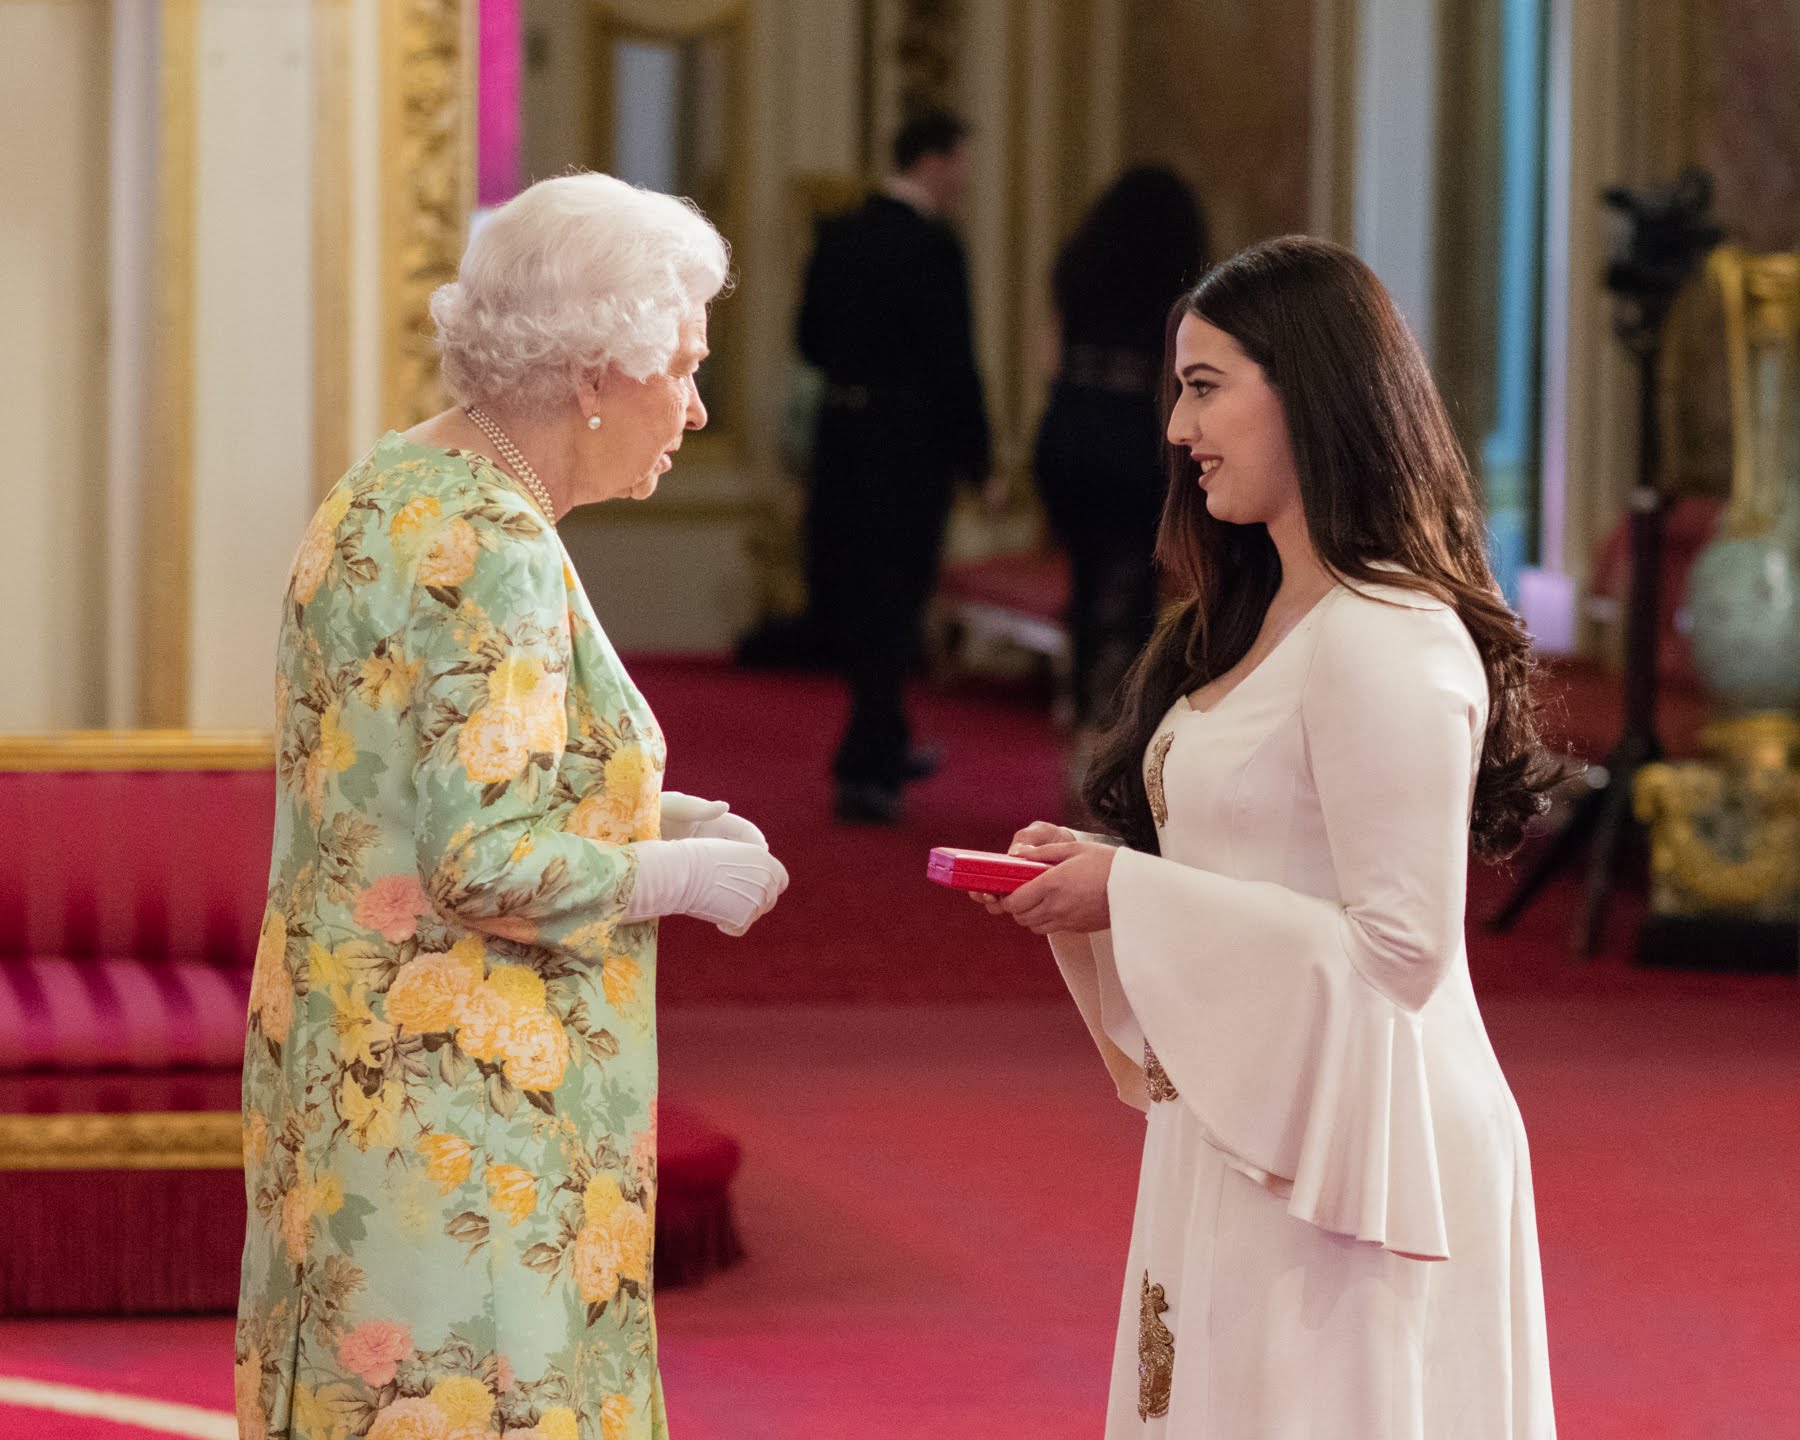 Martina Caruana 2018 Queen's Young Leader from Malta